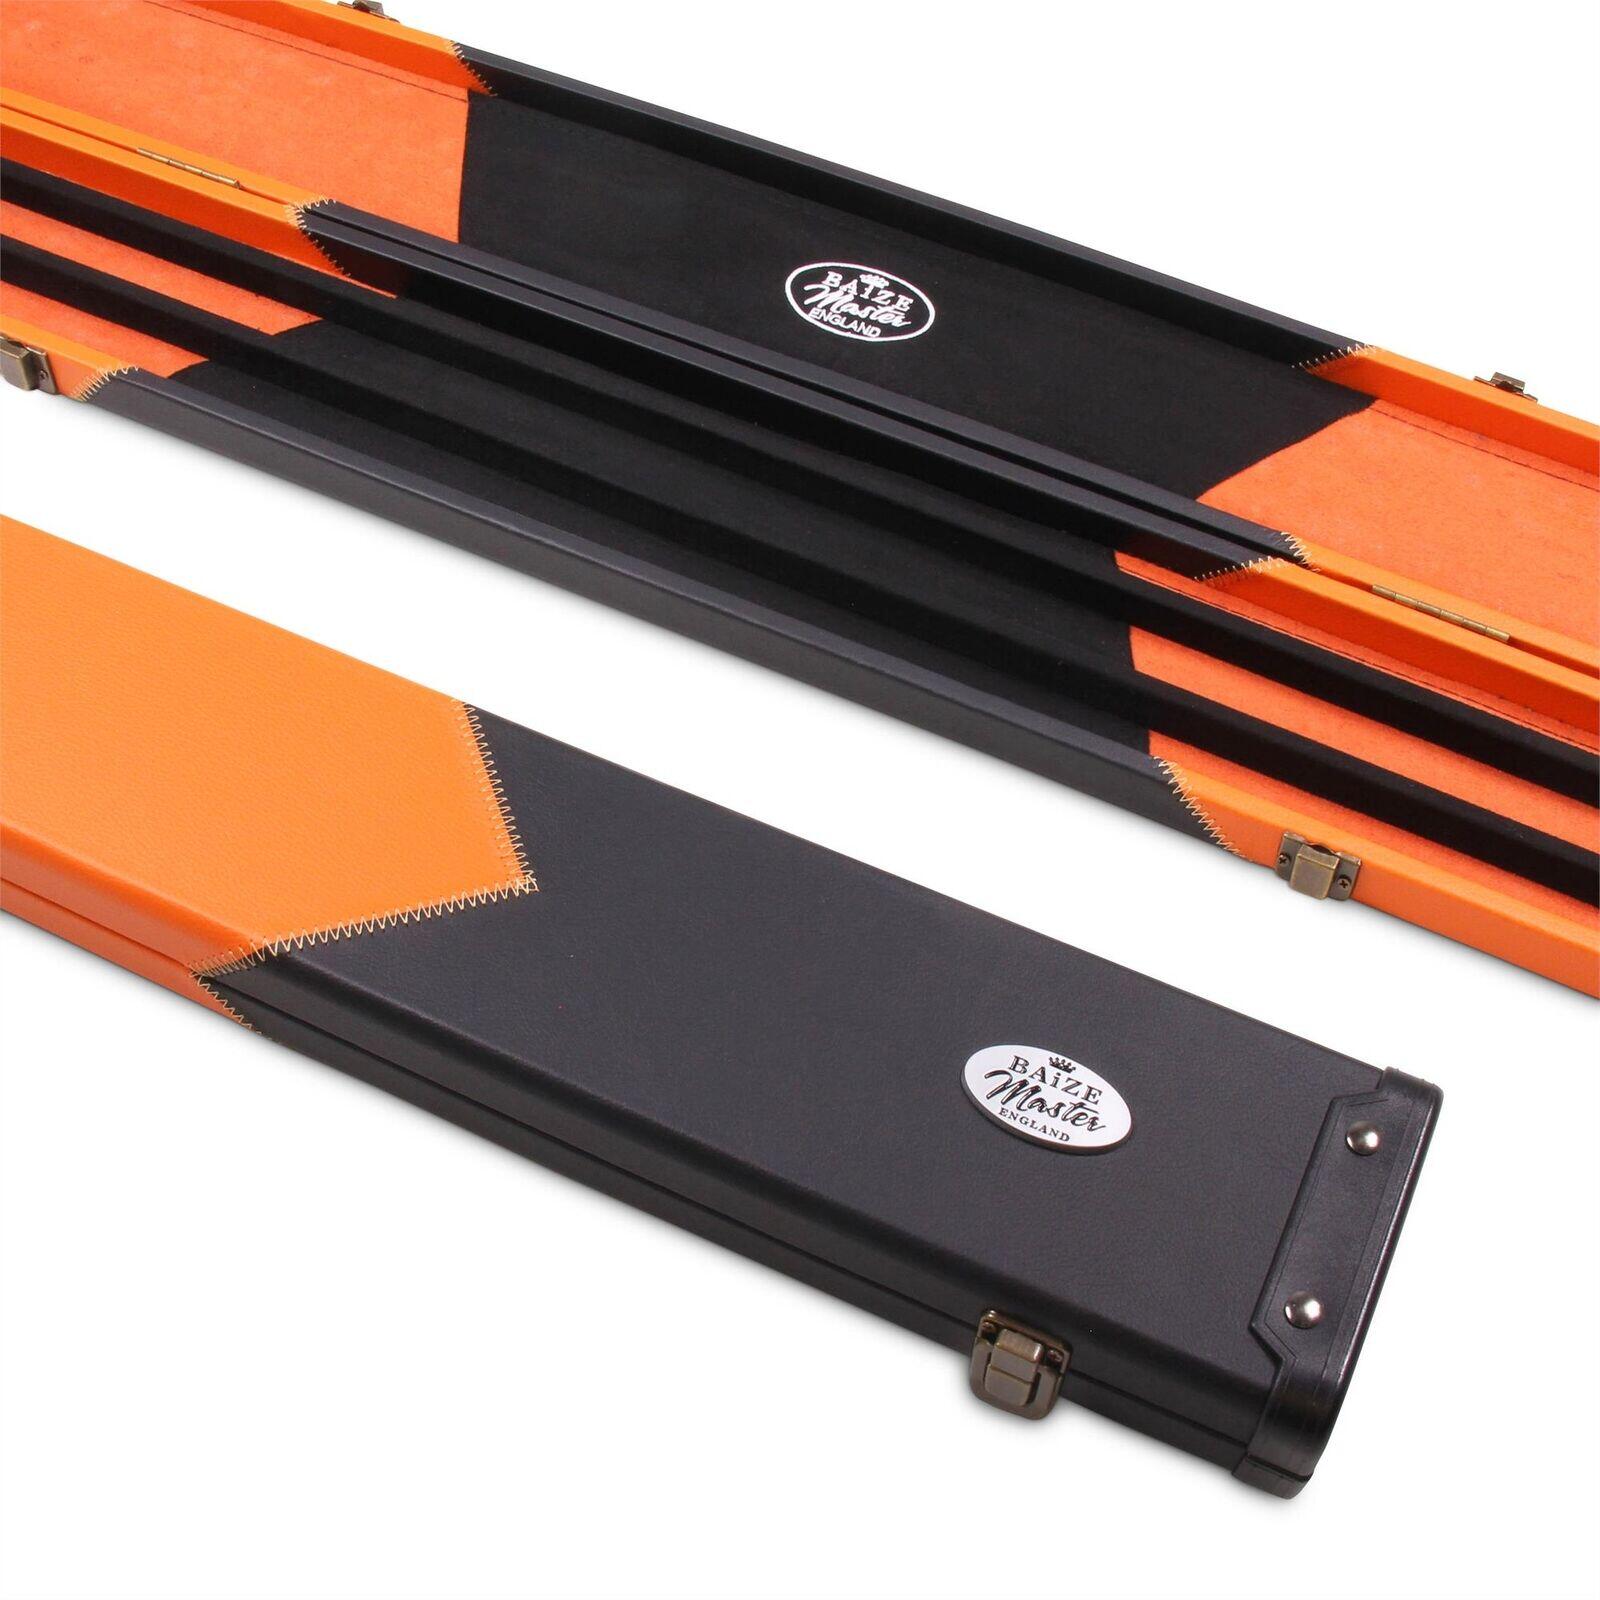 Baize Master 1 Piece WIDE ORANGE ARROW Snooker Pool Cue Case - Holds 3 Cues 1/7